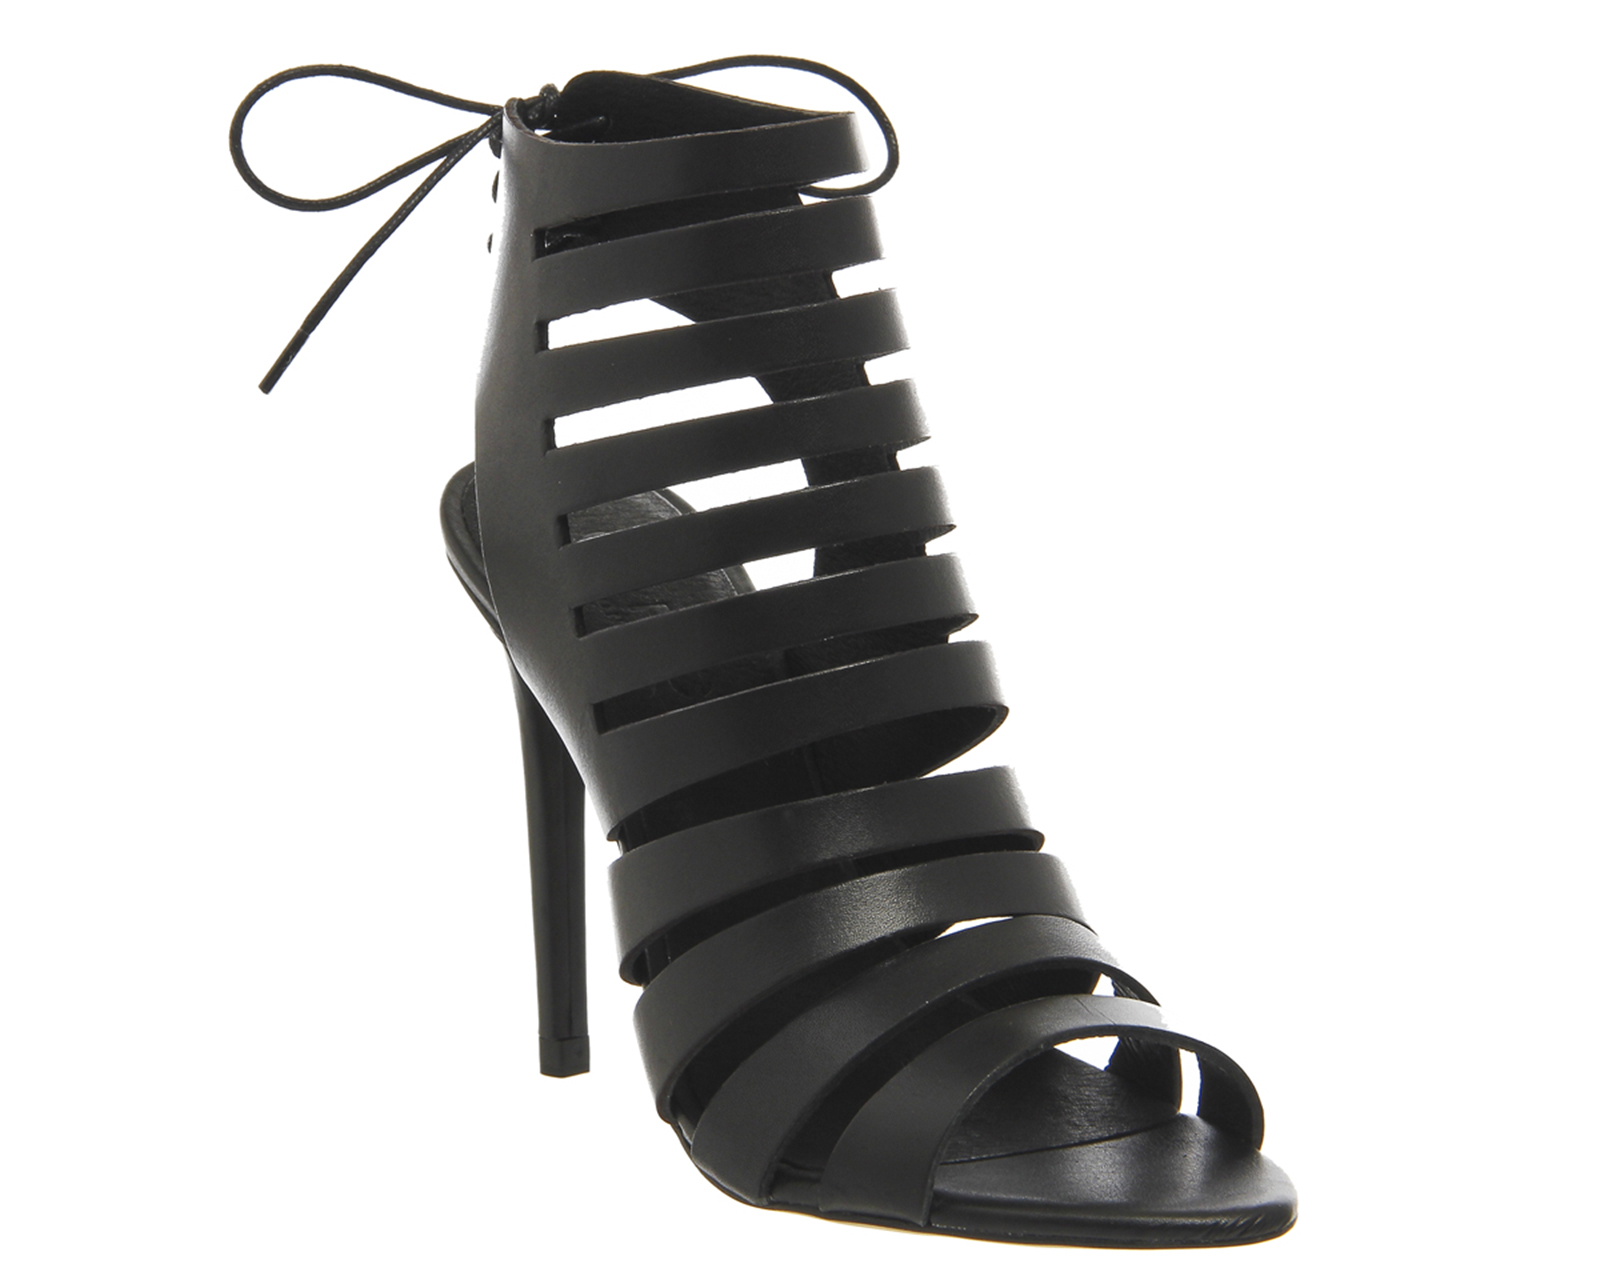 Black High Heels Women Sexy Shoes Almond Cut Out Lace Up Heels - Milanoo.com